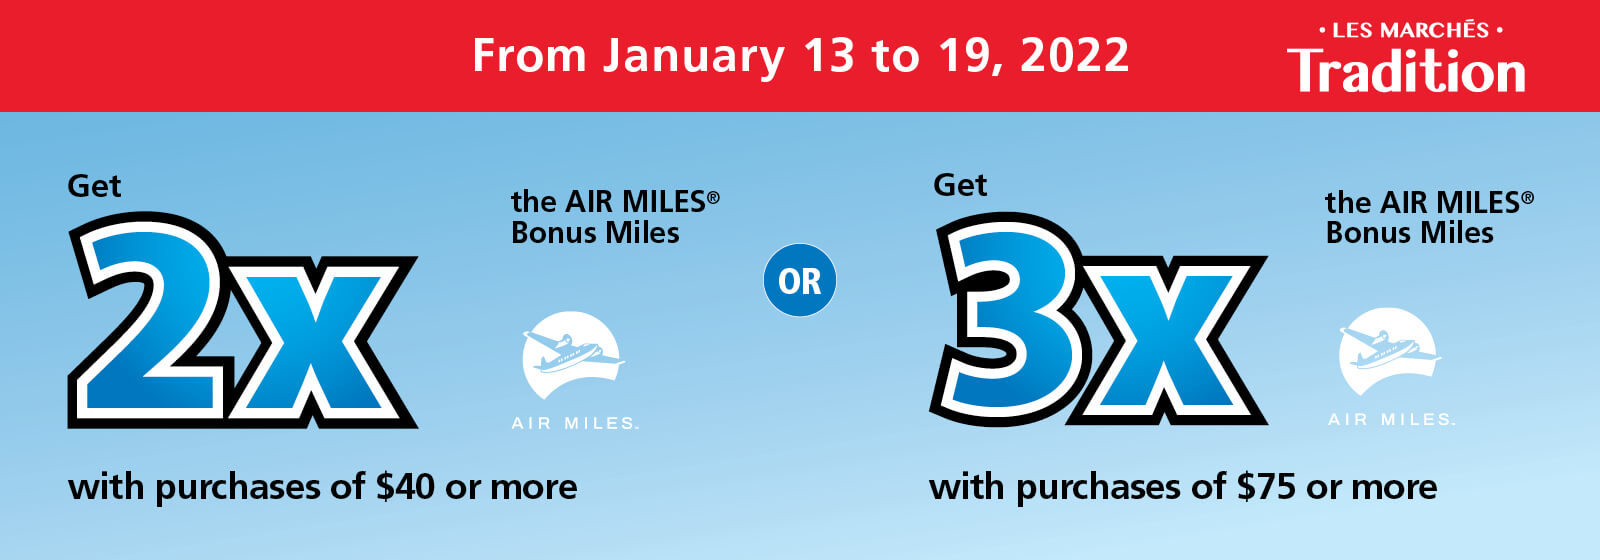 Text Reading 'Get 2x the Air Miles Bonus Miles, with purchases of $40 or more OR Get 3x the Air Miles Bonus Miles with purchases of $75 or more. Offer valid from January 13 to 19, 2022.'